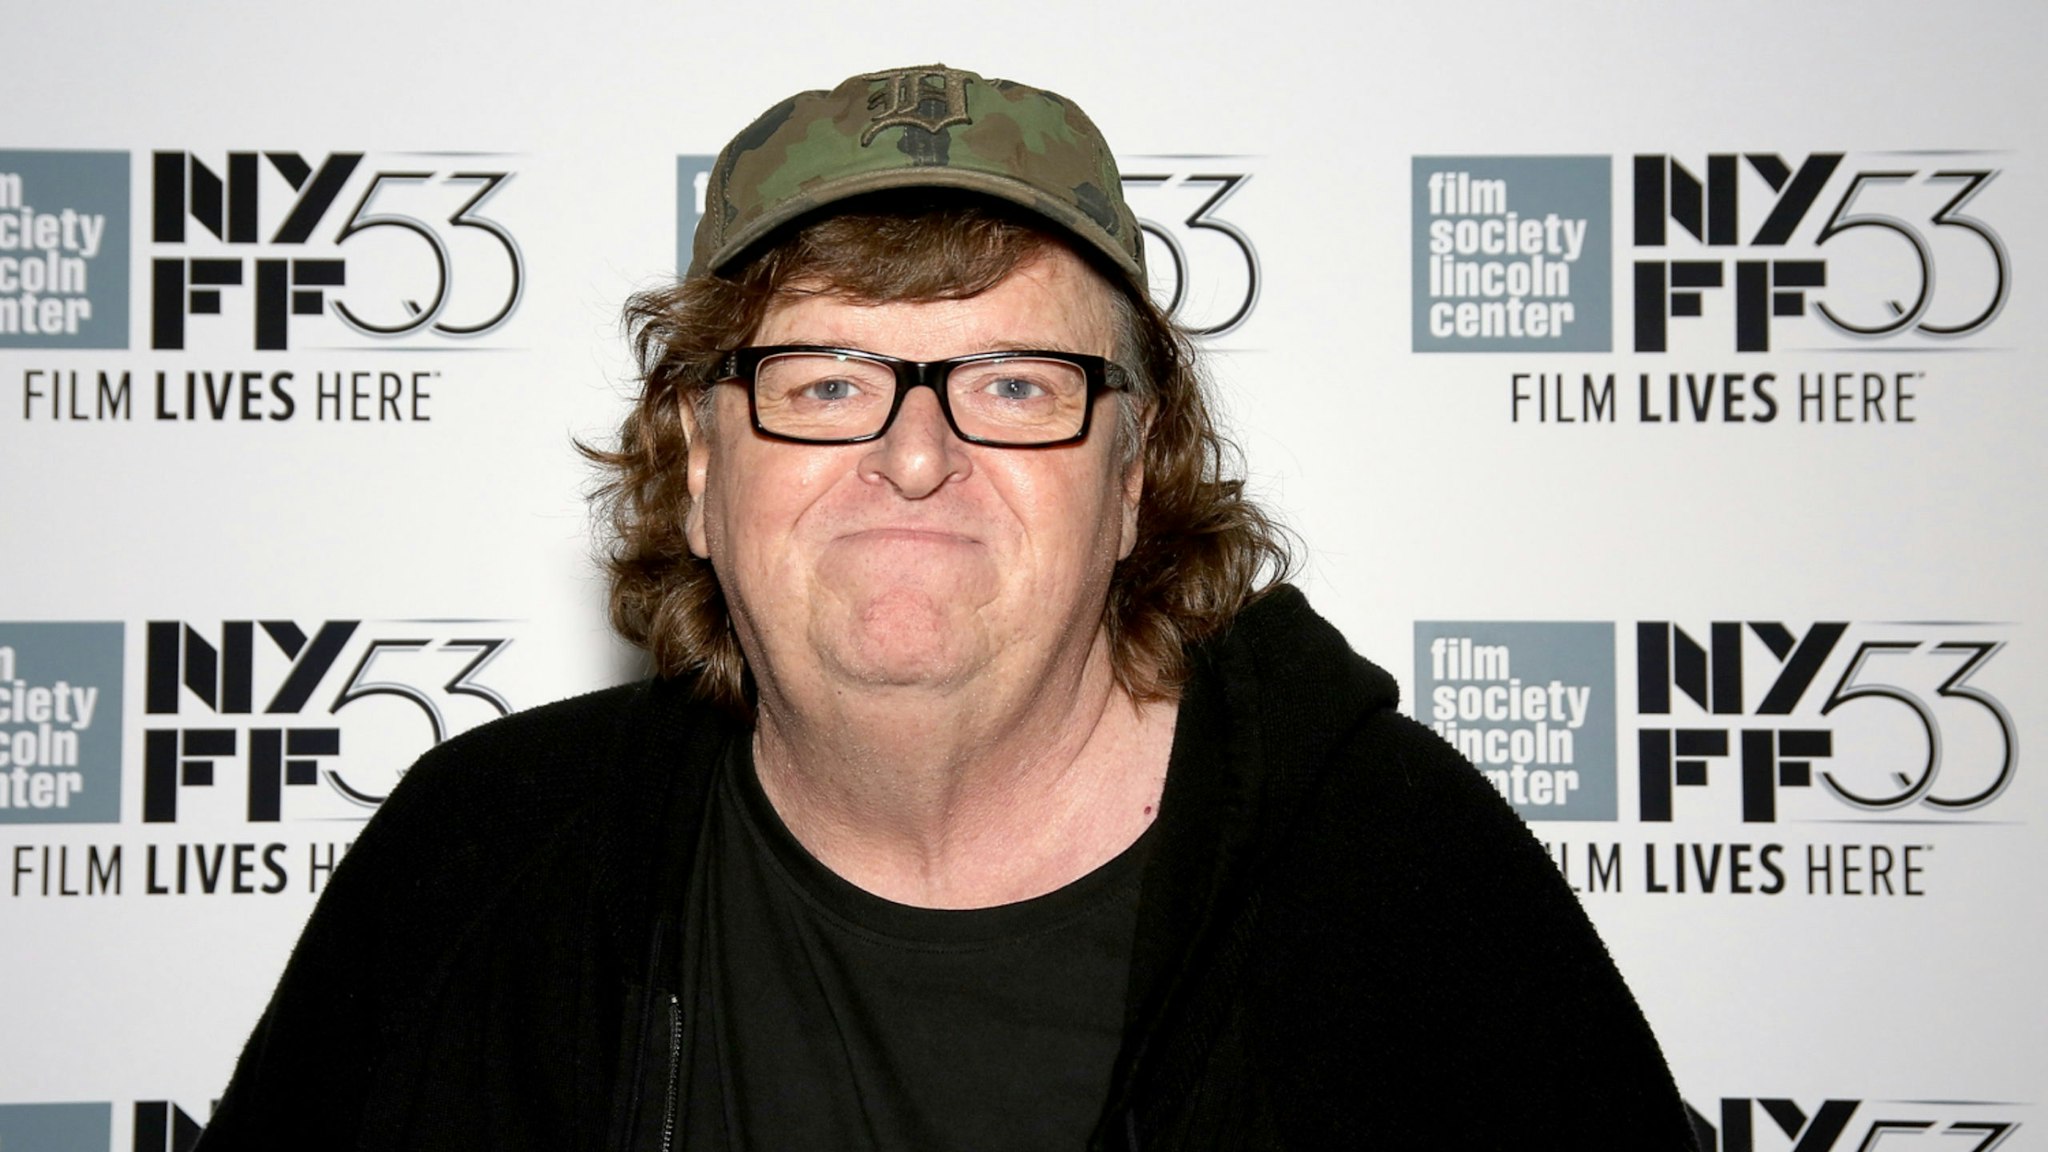 Director Michael Moore speaks at the 53rd New York Film Festival - Directors Dialogue: Michael Moore at Elinor Bunin Munroe Film Center on October 4, 2015 in New York City.